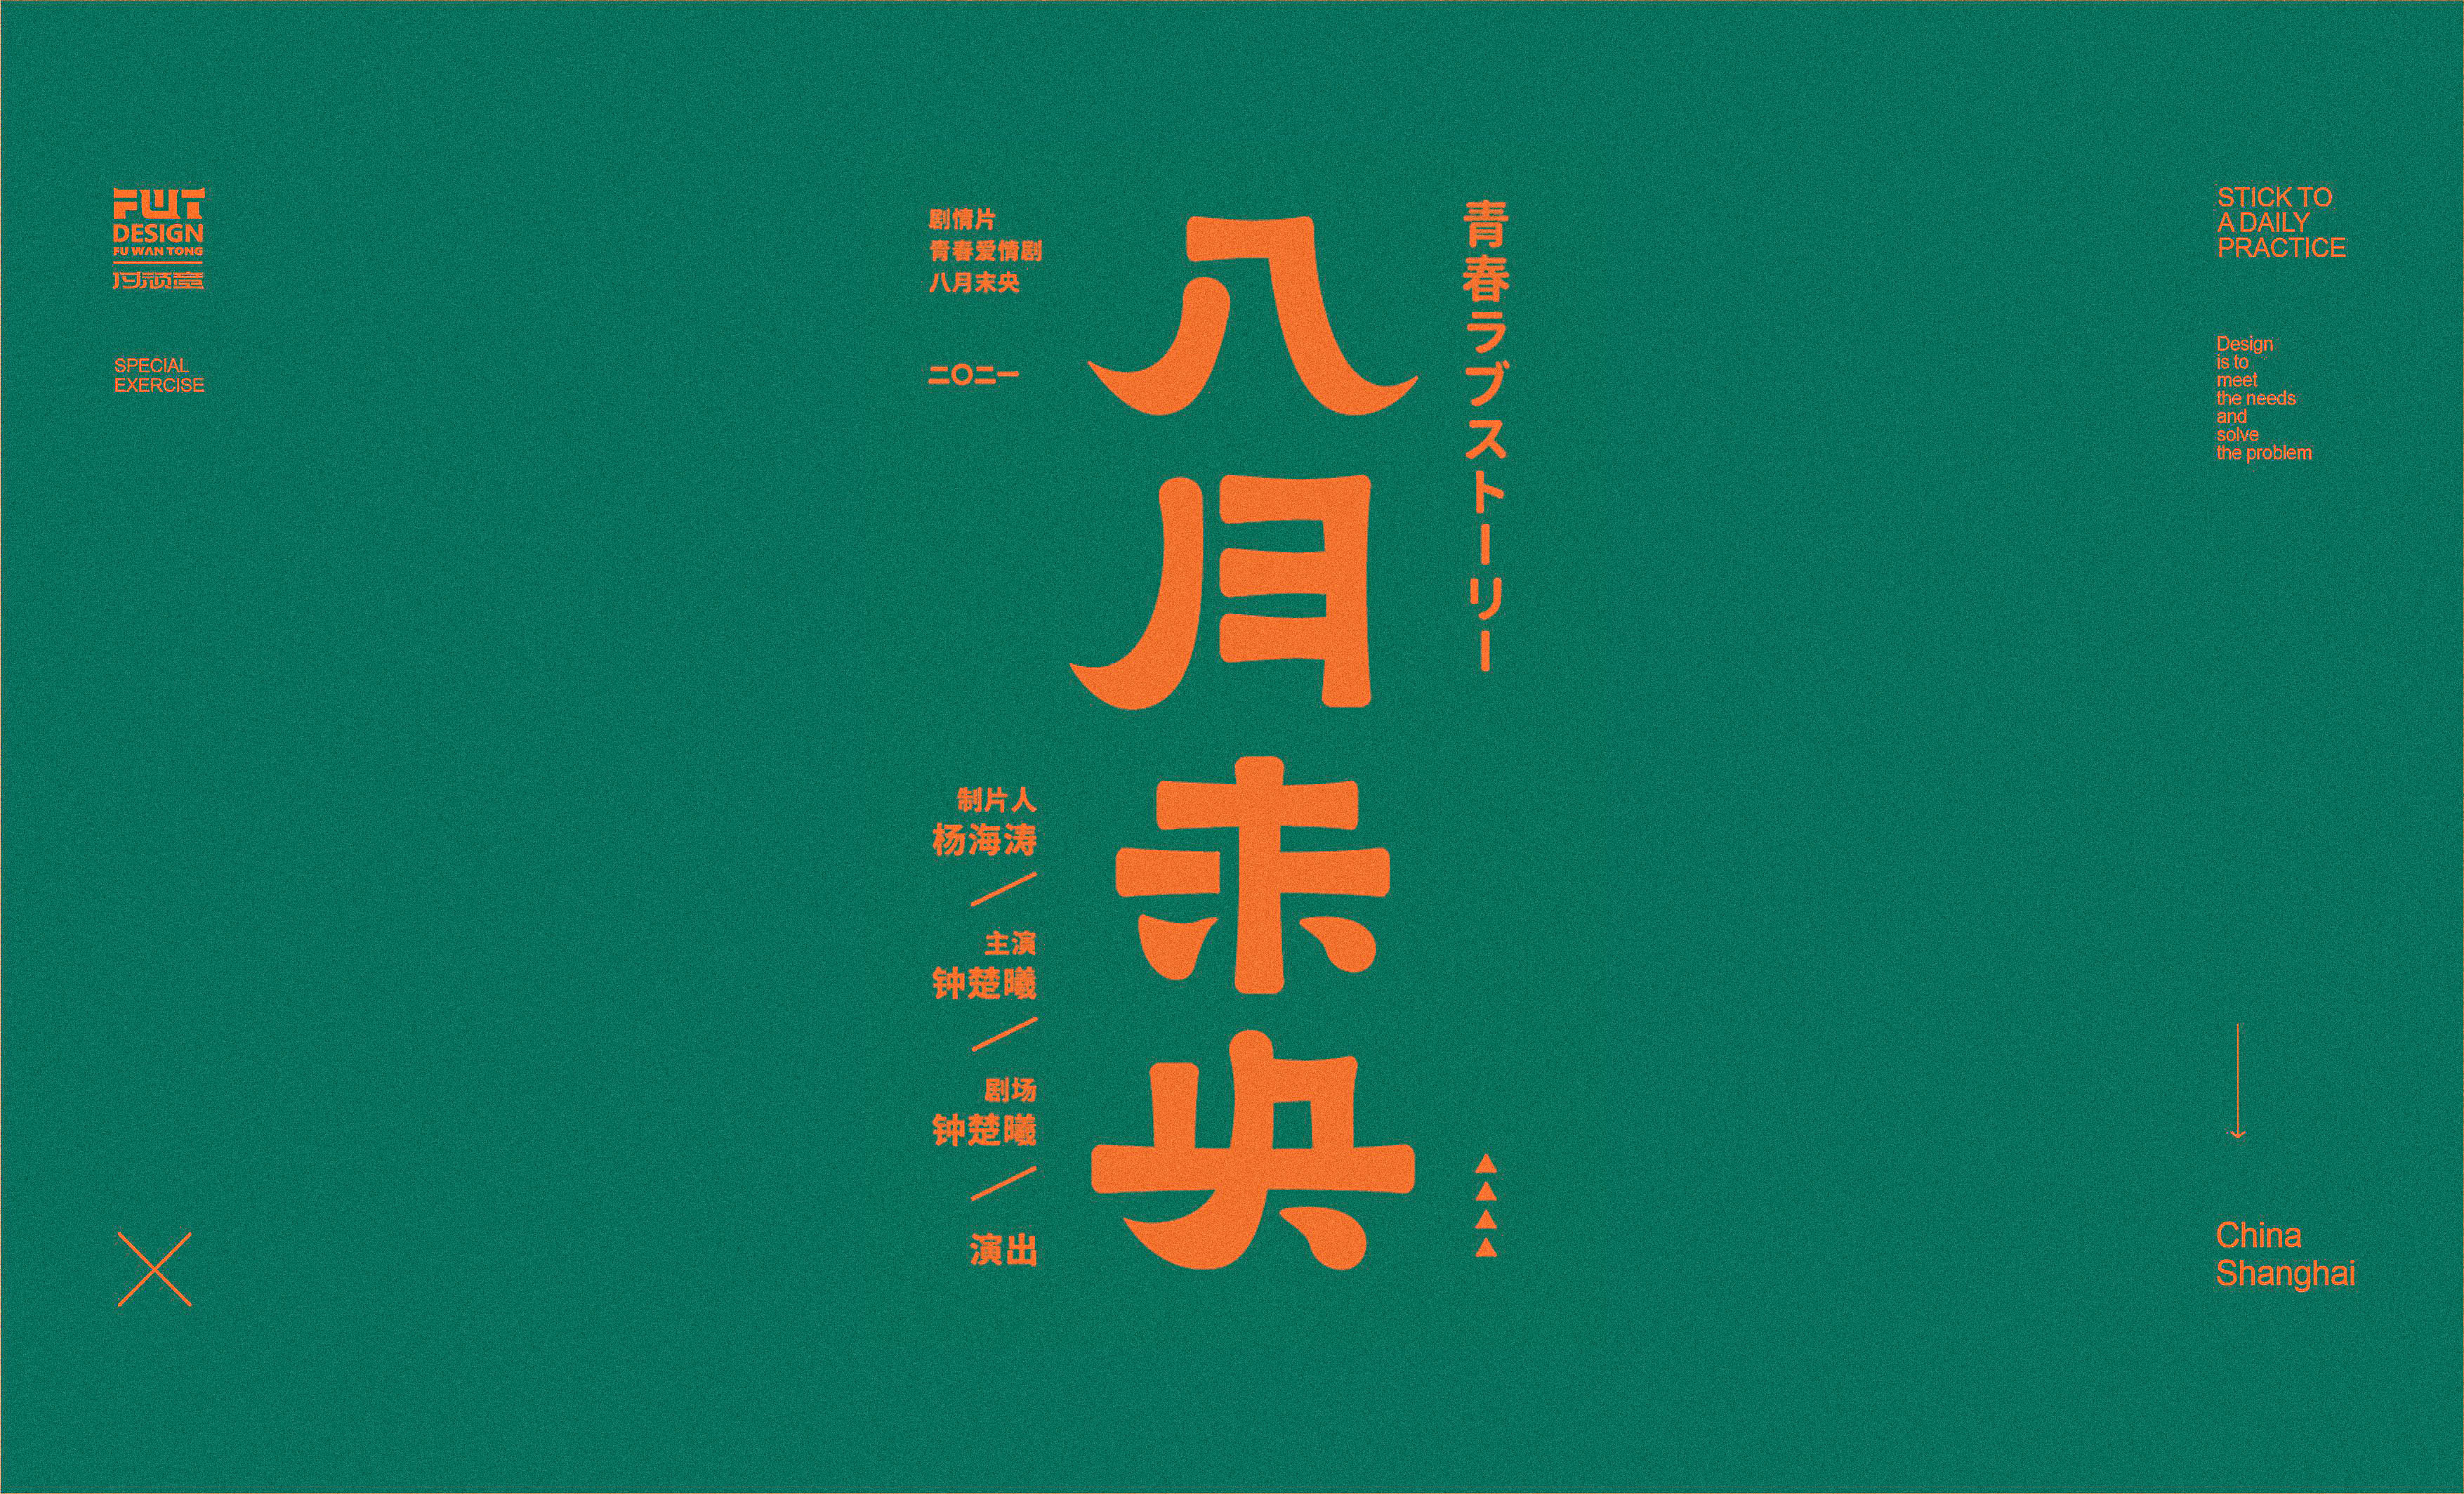 20P Collection of the latest Chinese font design schemes in 2021 #.327